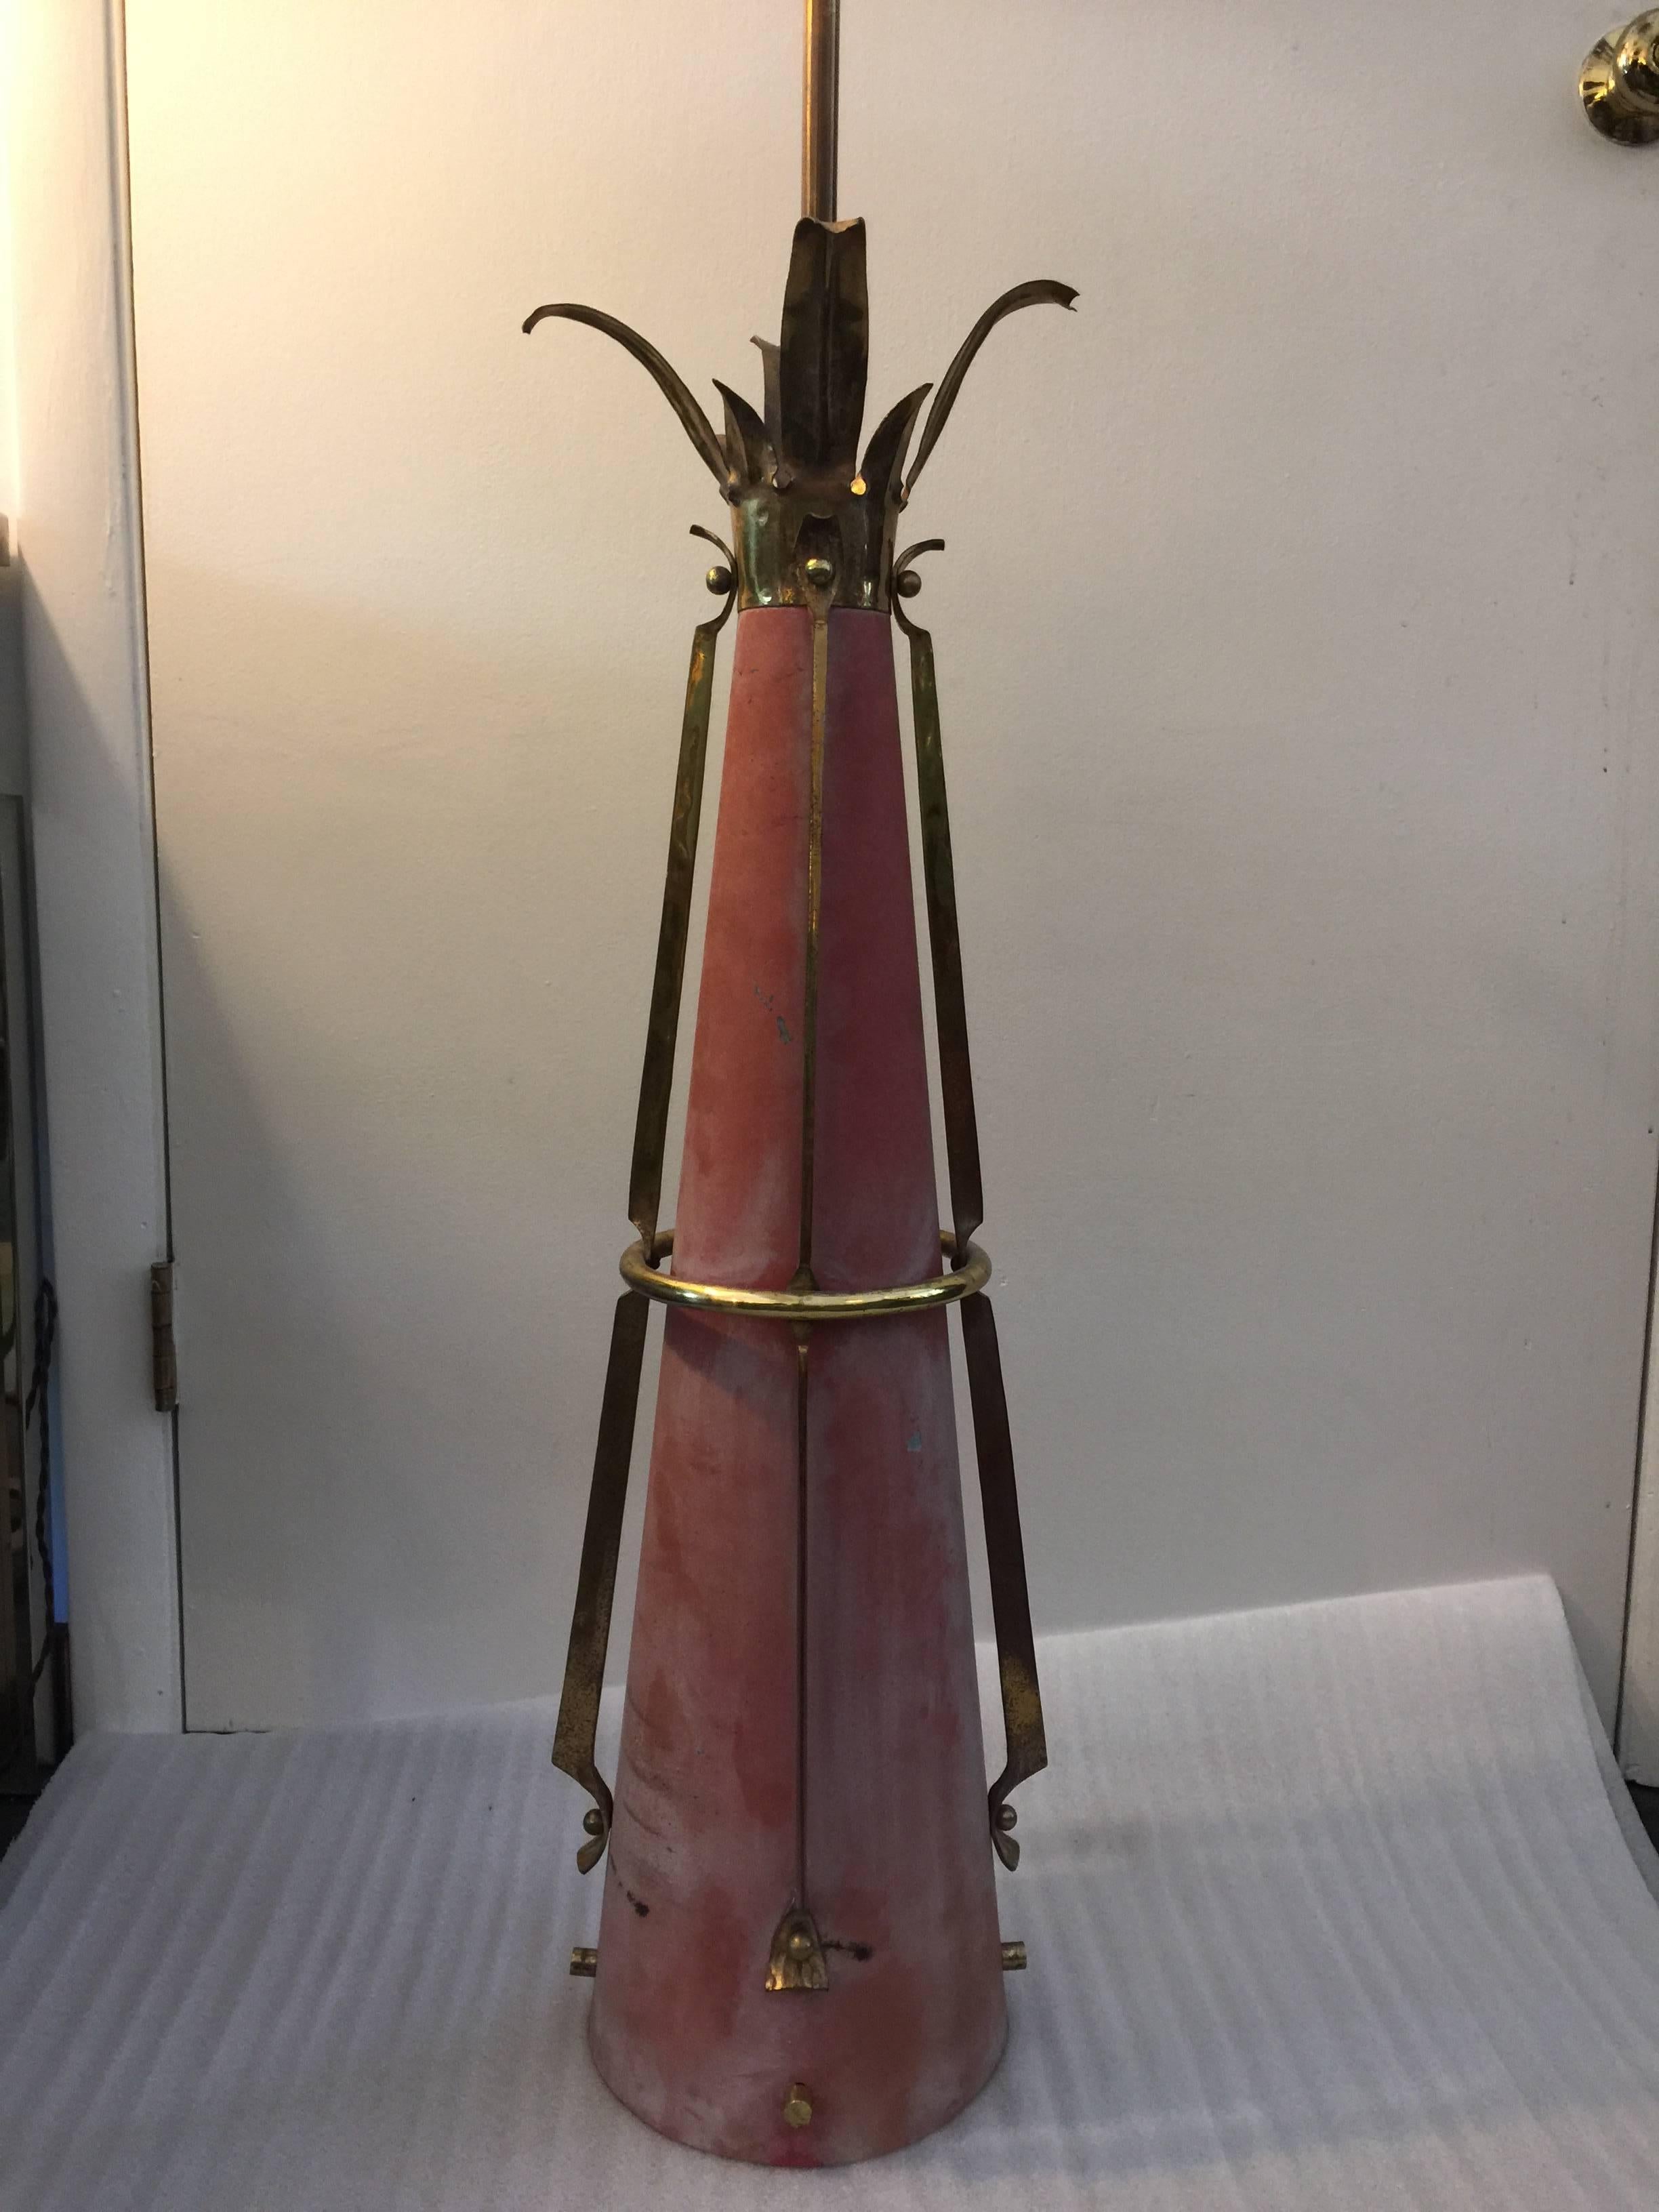 Original aged/distressed coral paint and gold/brass accents, light fixtures.

Dimensions of cone only 32.5 inches long. Two available, priced individually.